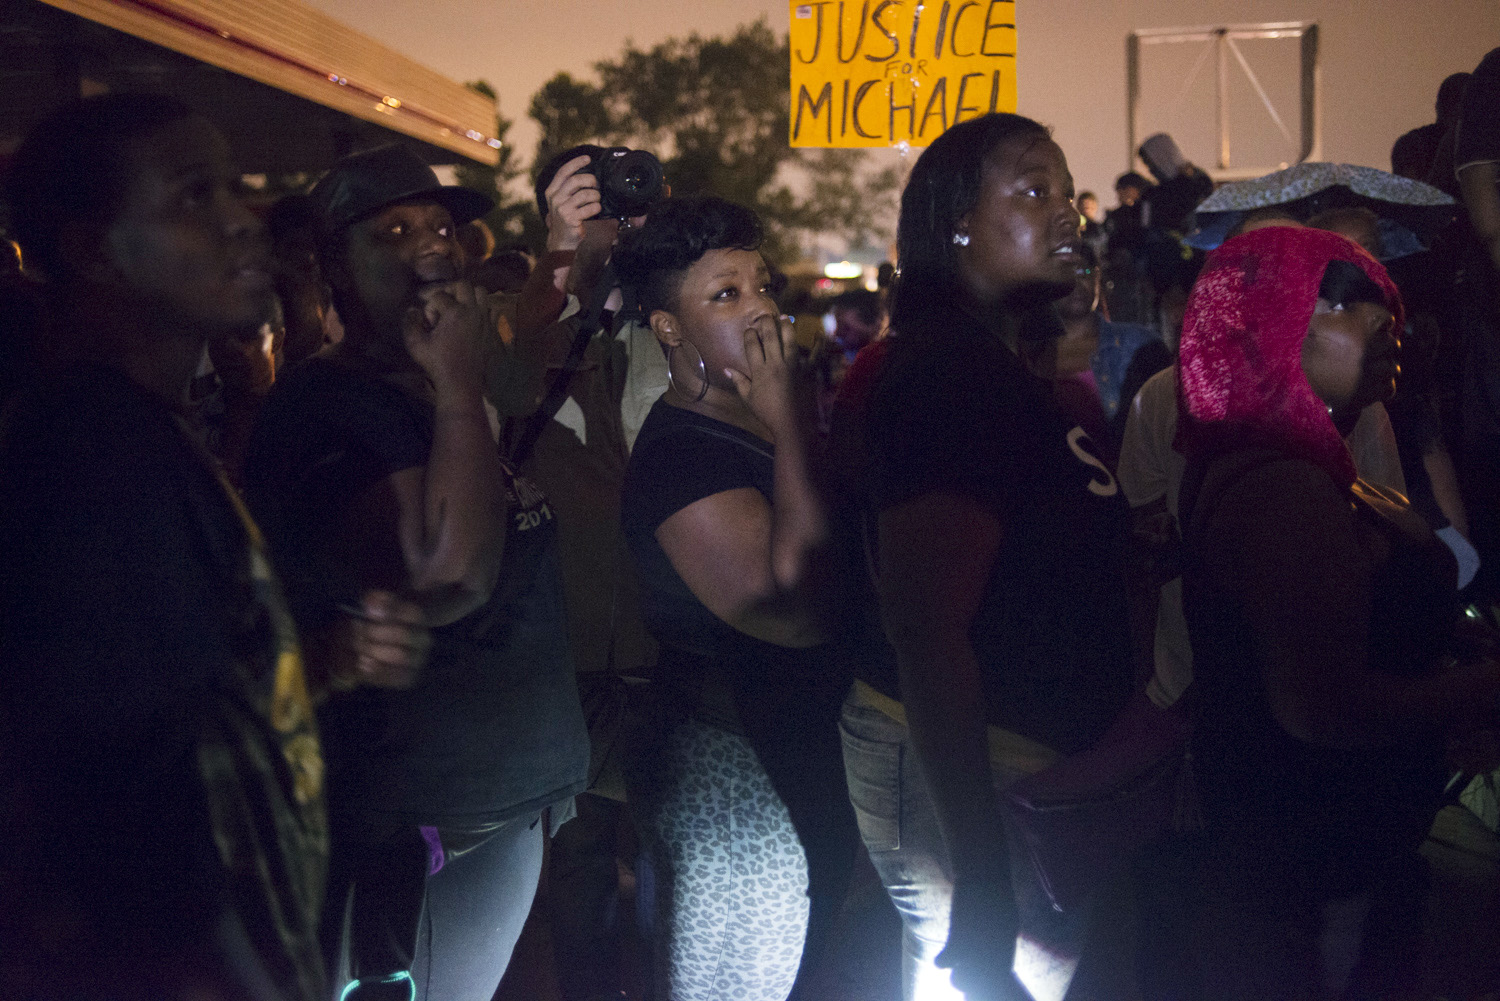 Protestors look on during a peaceful demonstration on Florissant Ave. in Ferguson, Mo. on Aug. 16, 2014. (Jon Lowenstein—Noor for TIME)